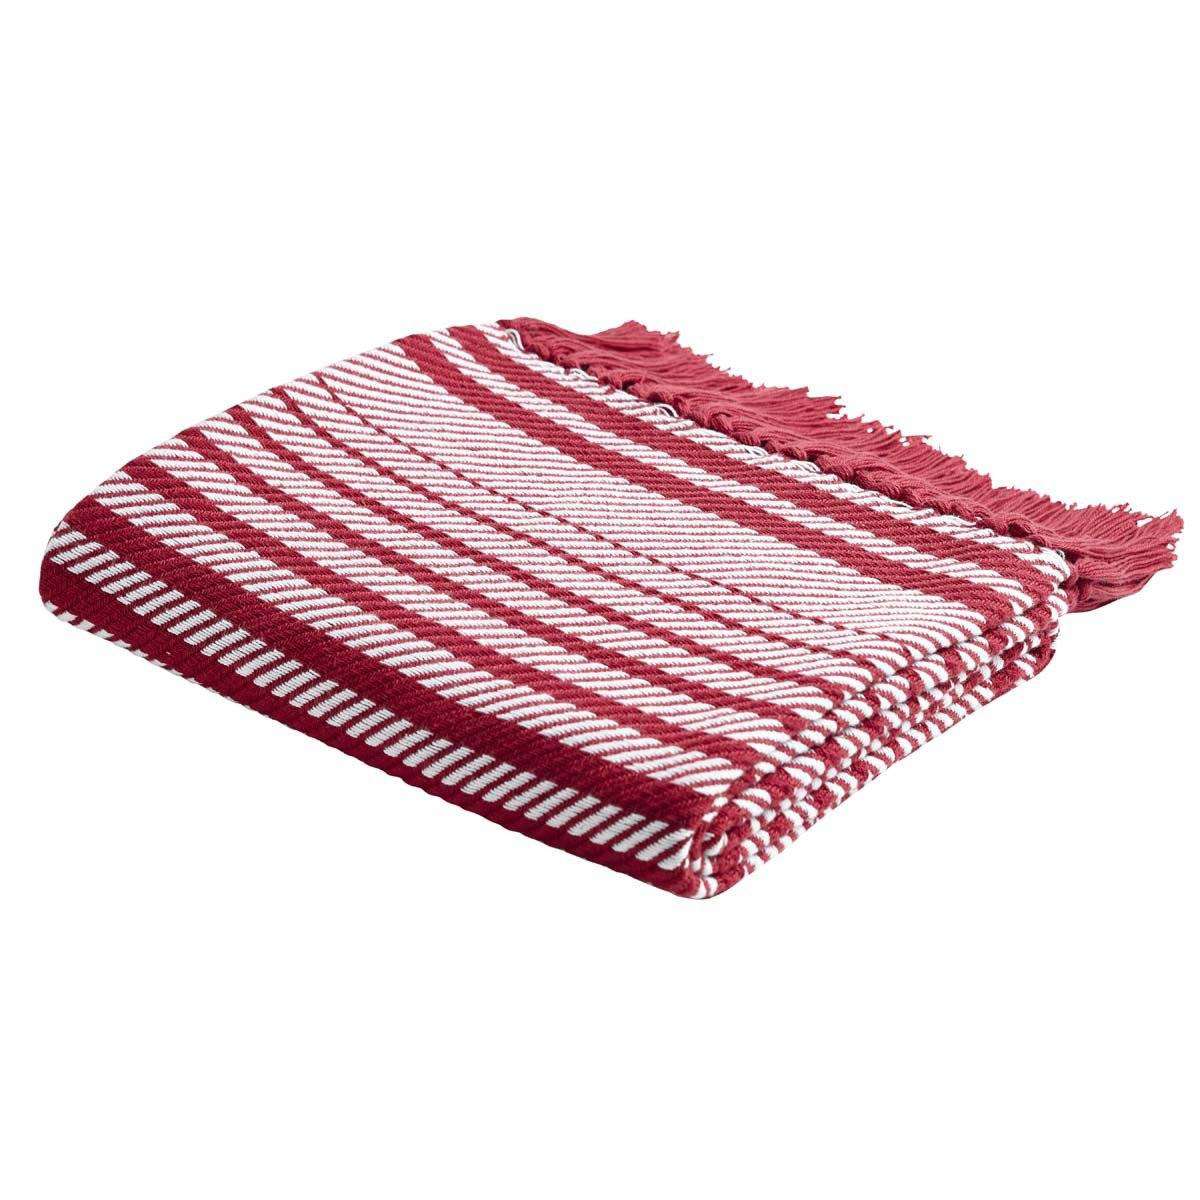 Whimsical Candy Cane Stripe Woven Throw 60" x 50" VHC Brands - The Fox Decor